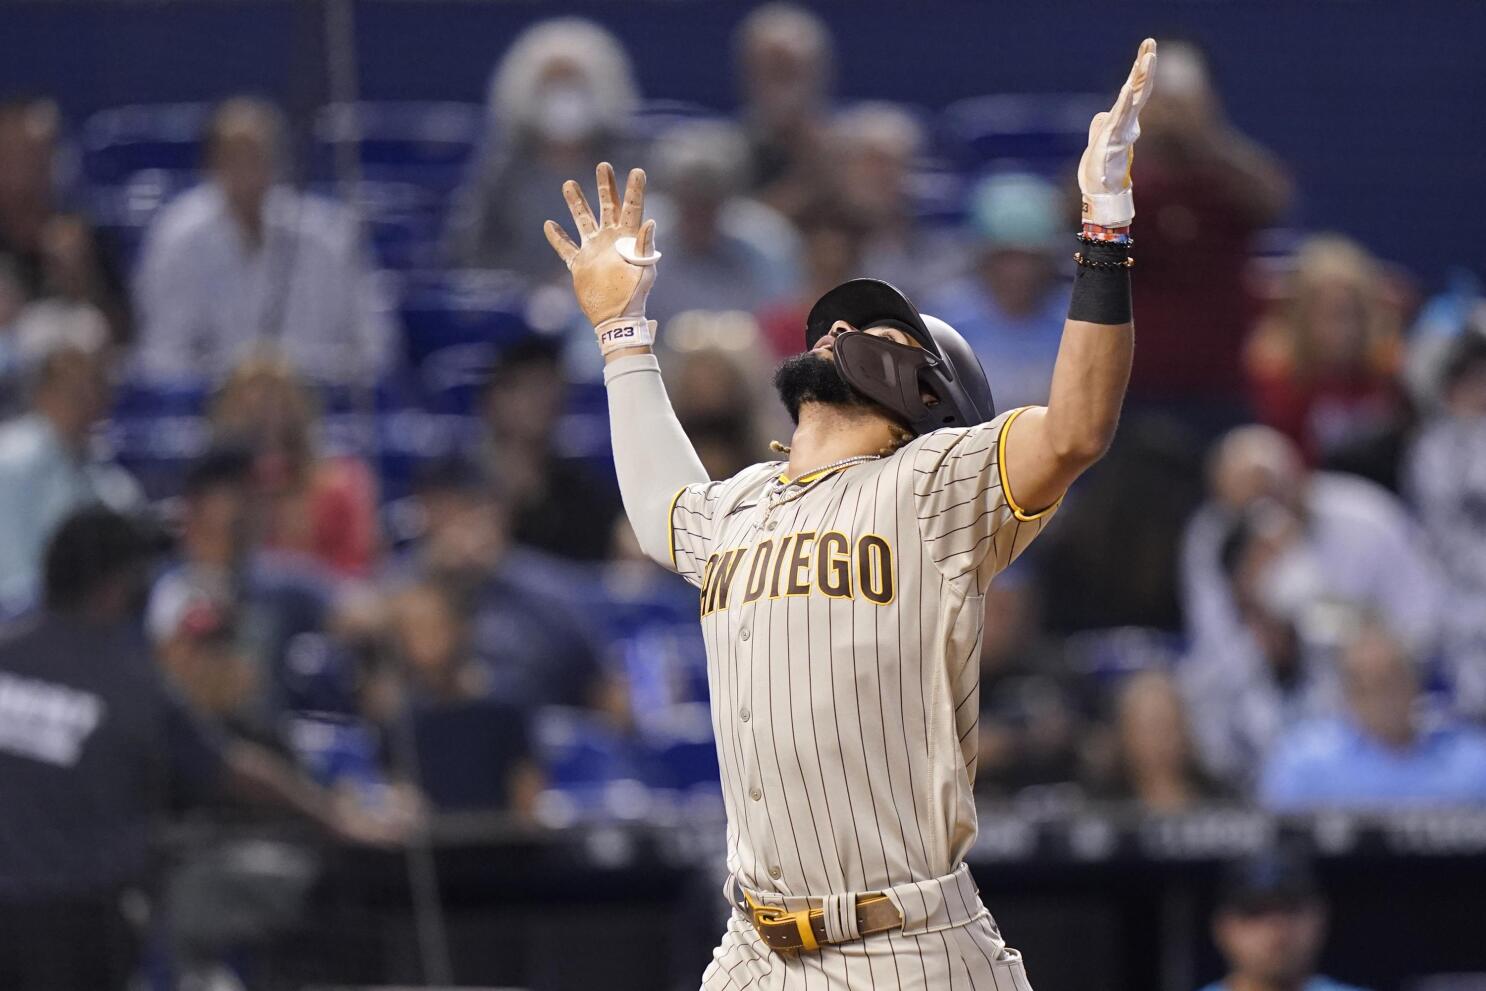 Tatis homers but Marlins rally late to beat Padres 3-2